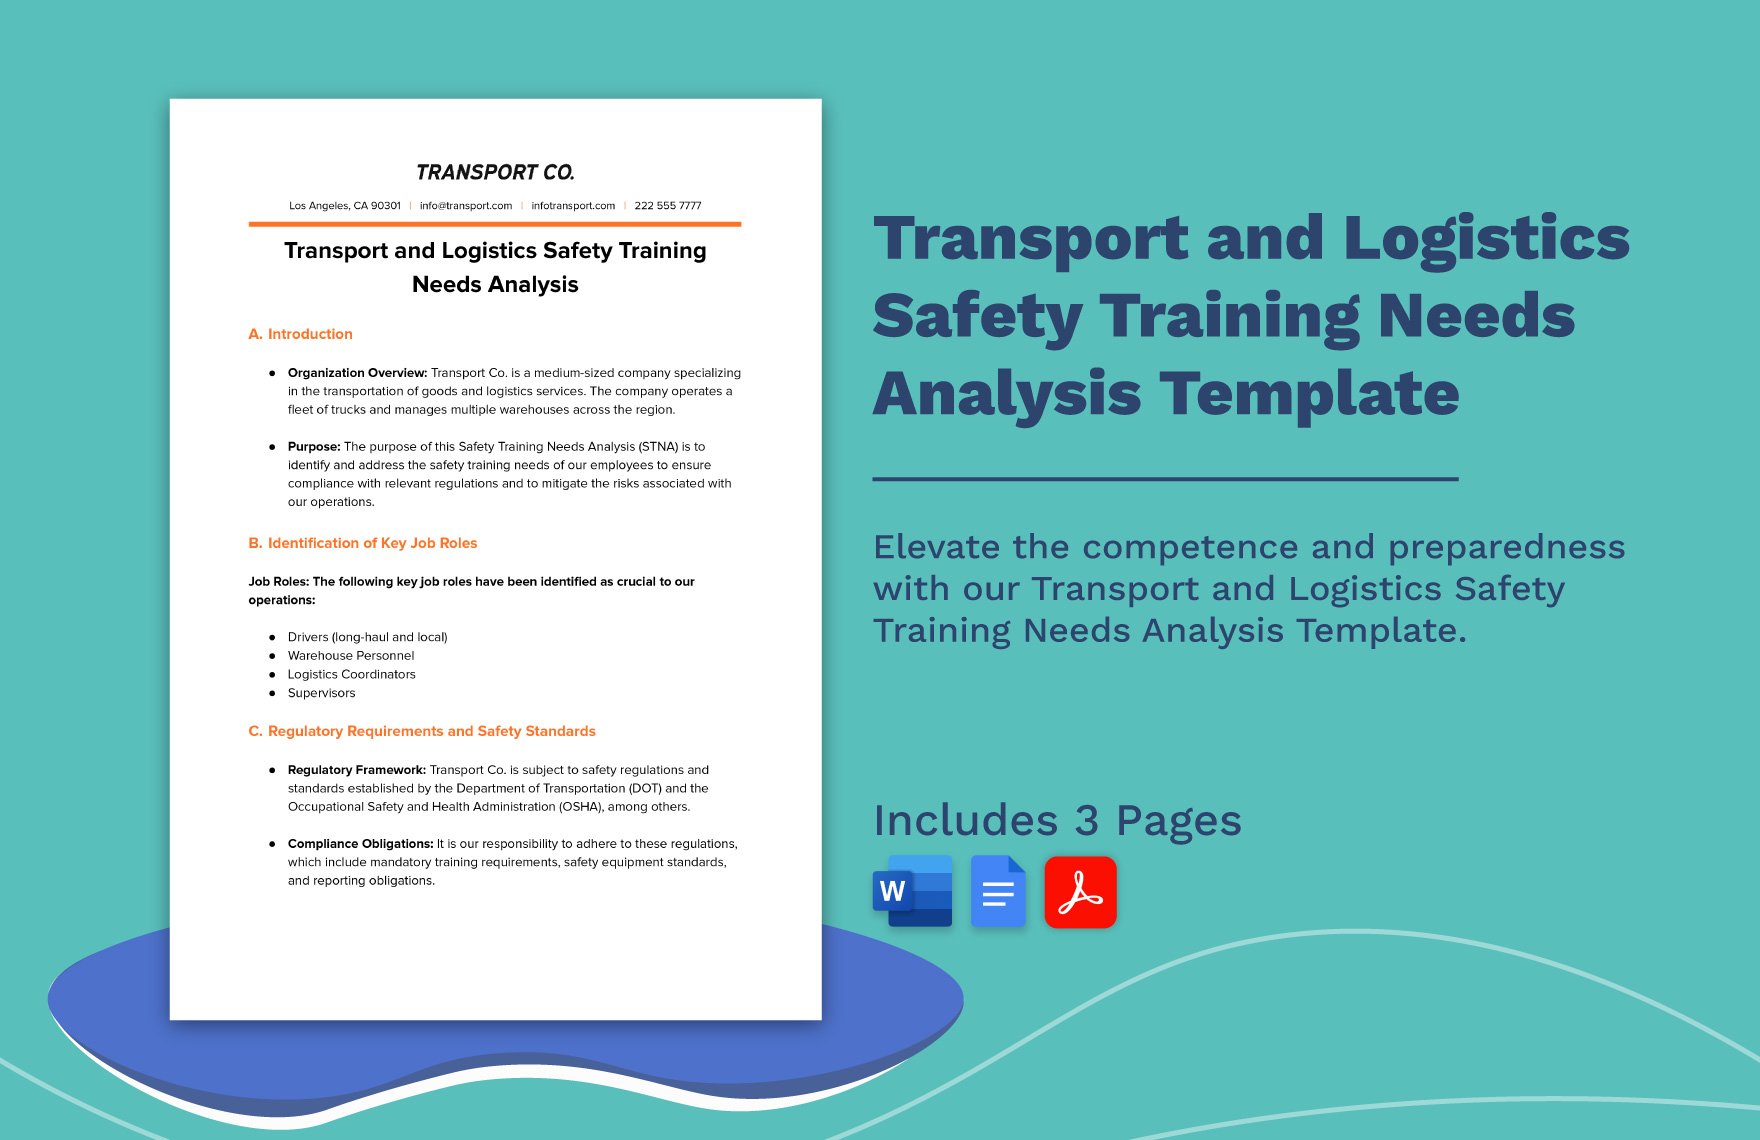 Transport and Logistics Safety Training Needs Analysis Template